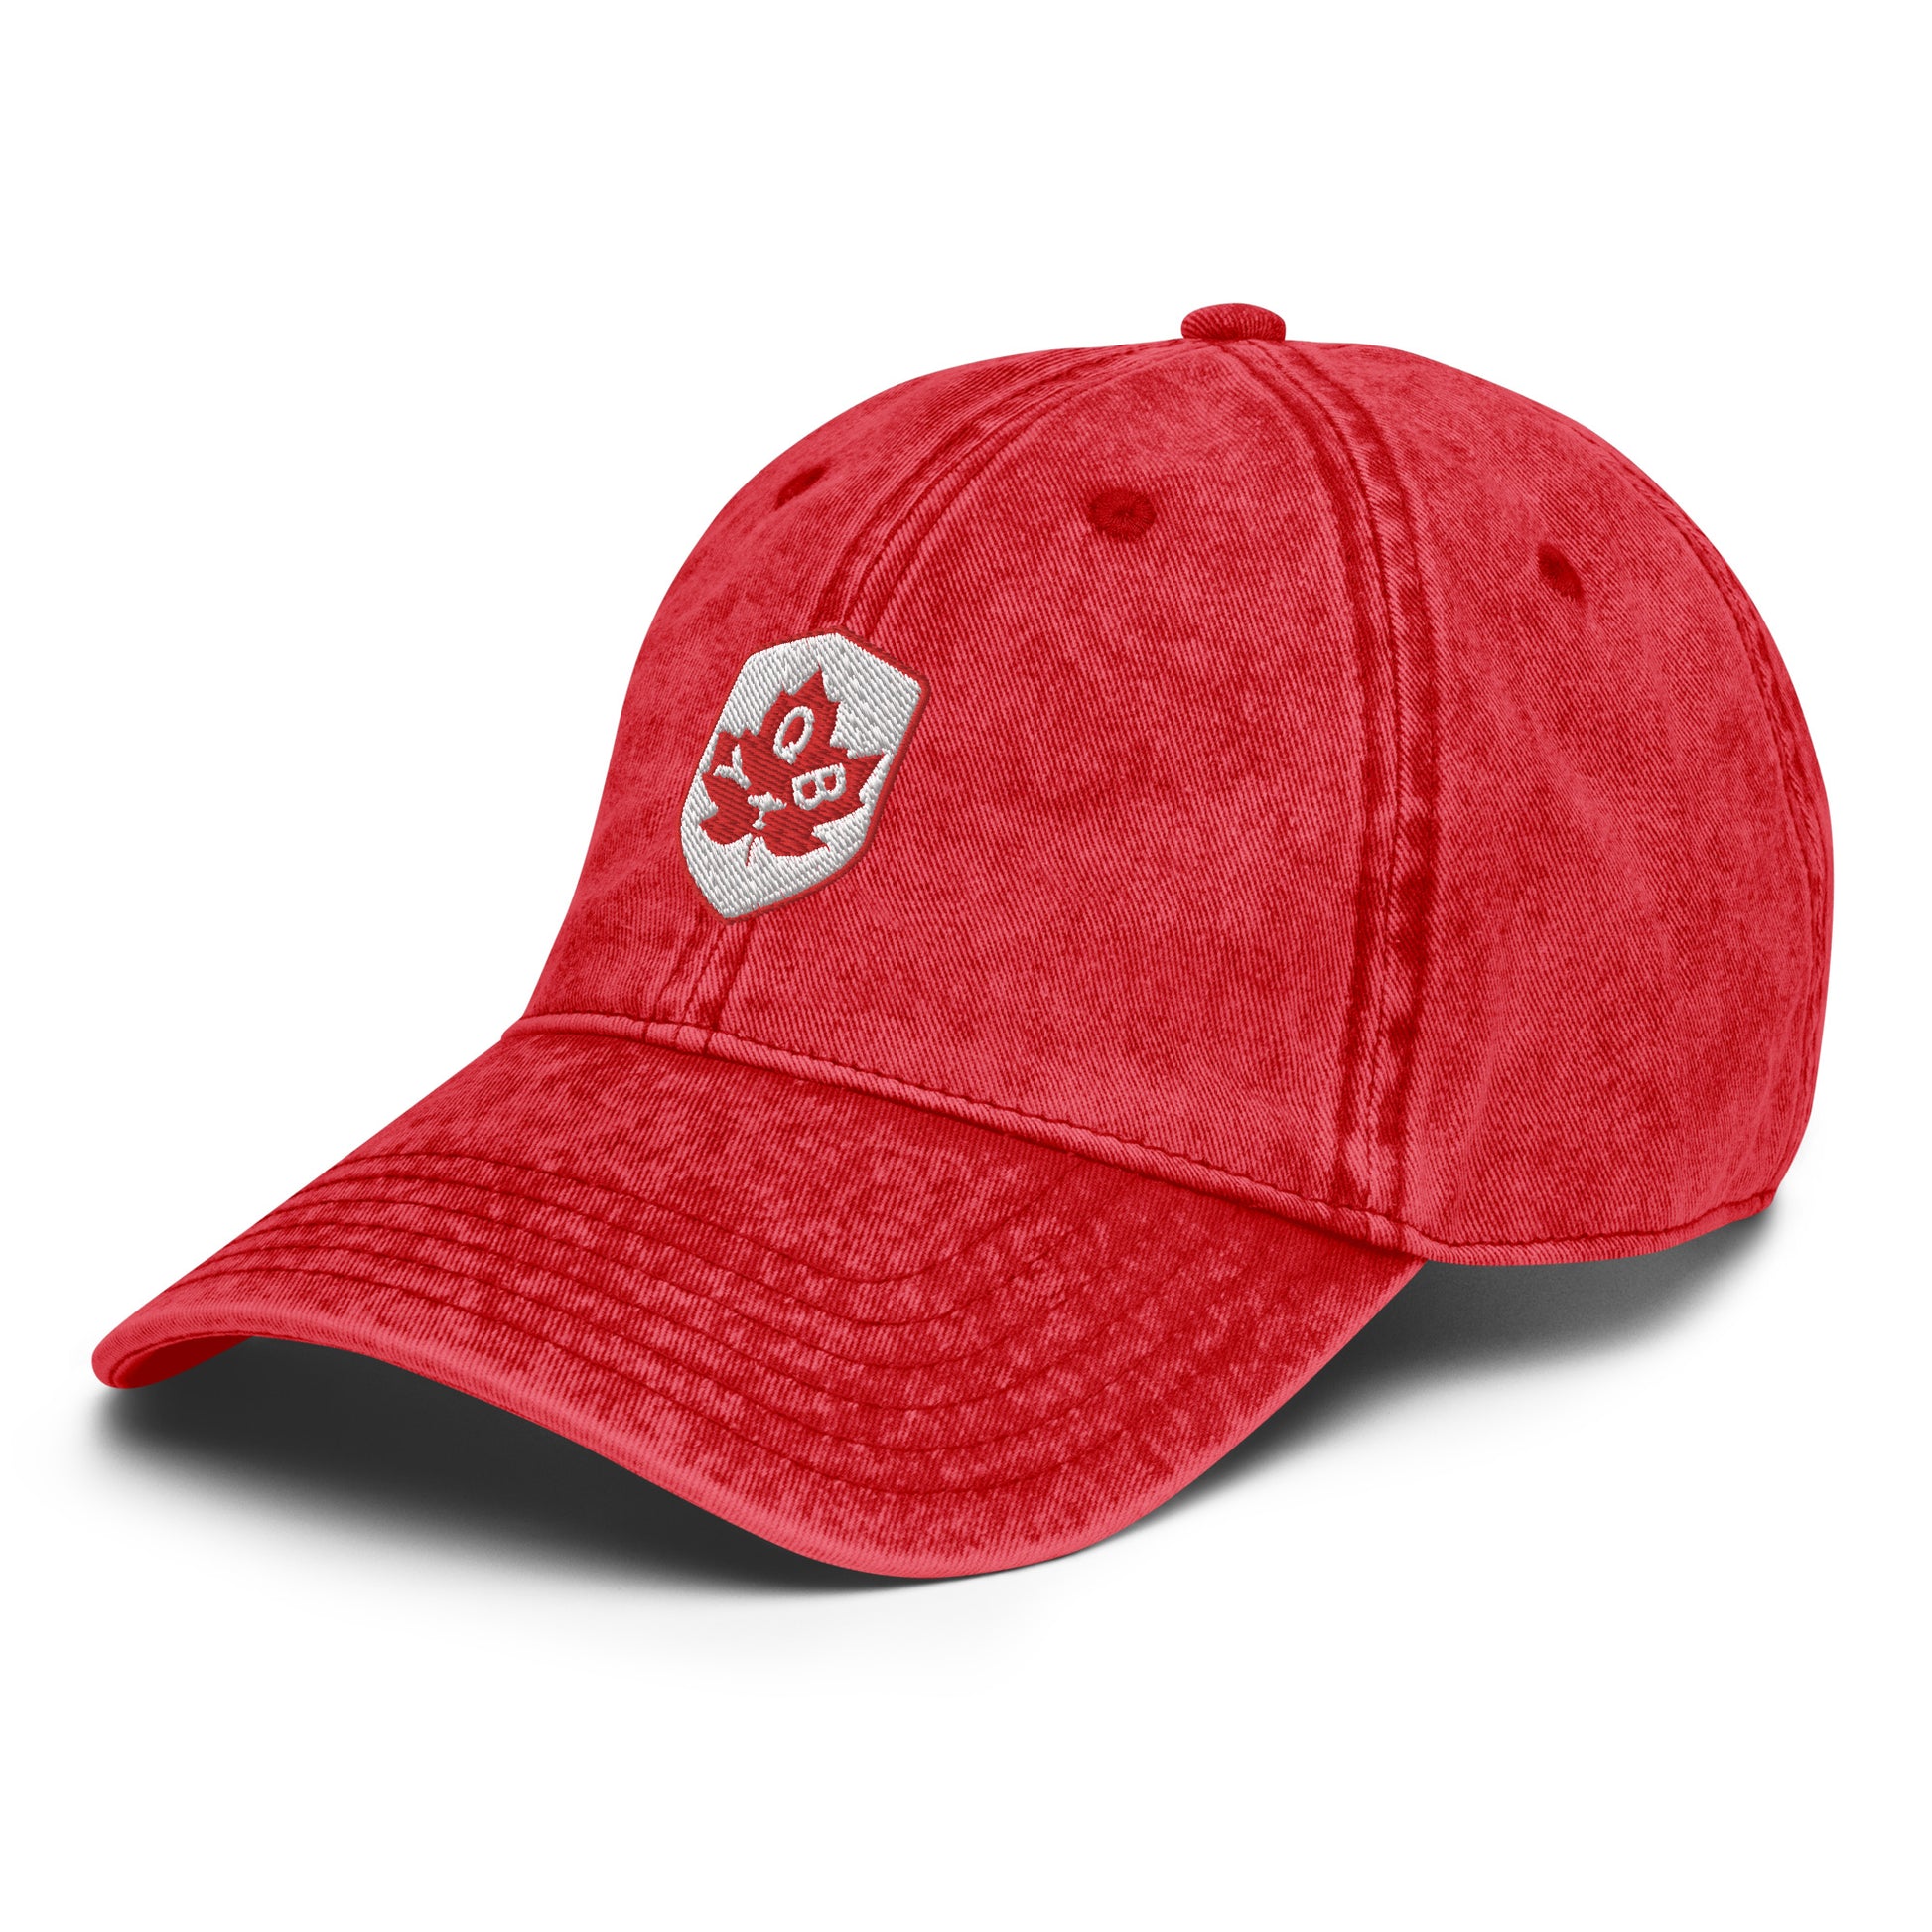 Maple Leaf Twill Cap - Red/White • YQB Quebec City • YHM Designs - Image 20